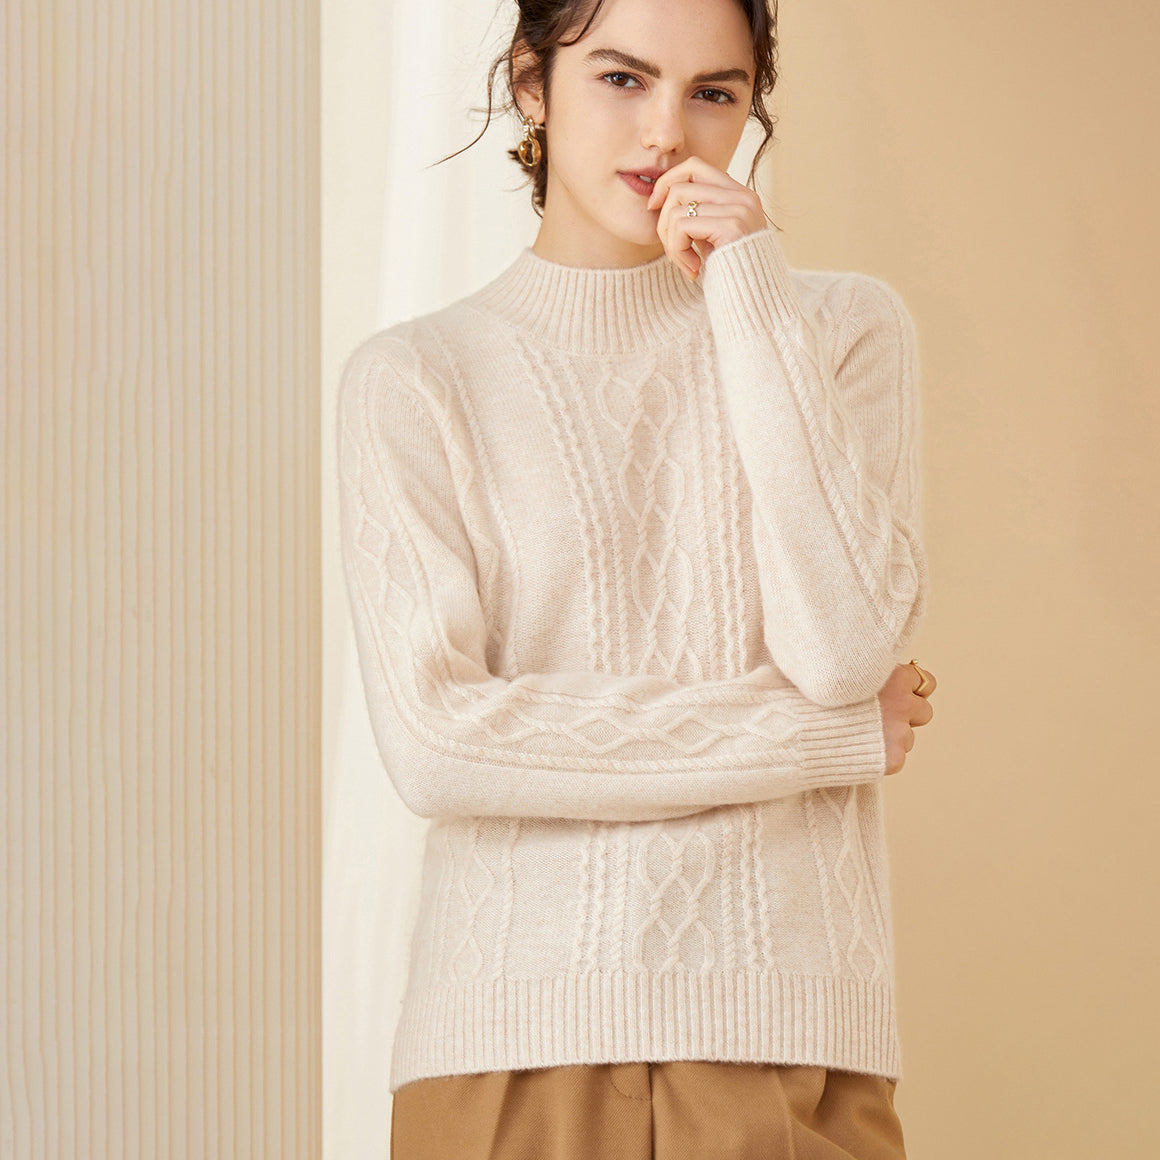 Cashmere Sweater for Women Mock Neck Long Sleeve Warm Cashmere Sweater